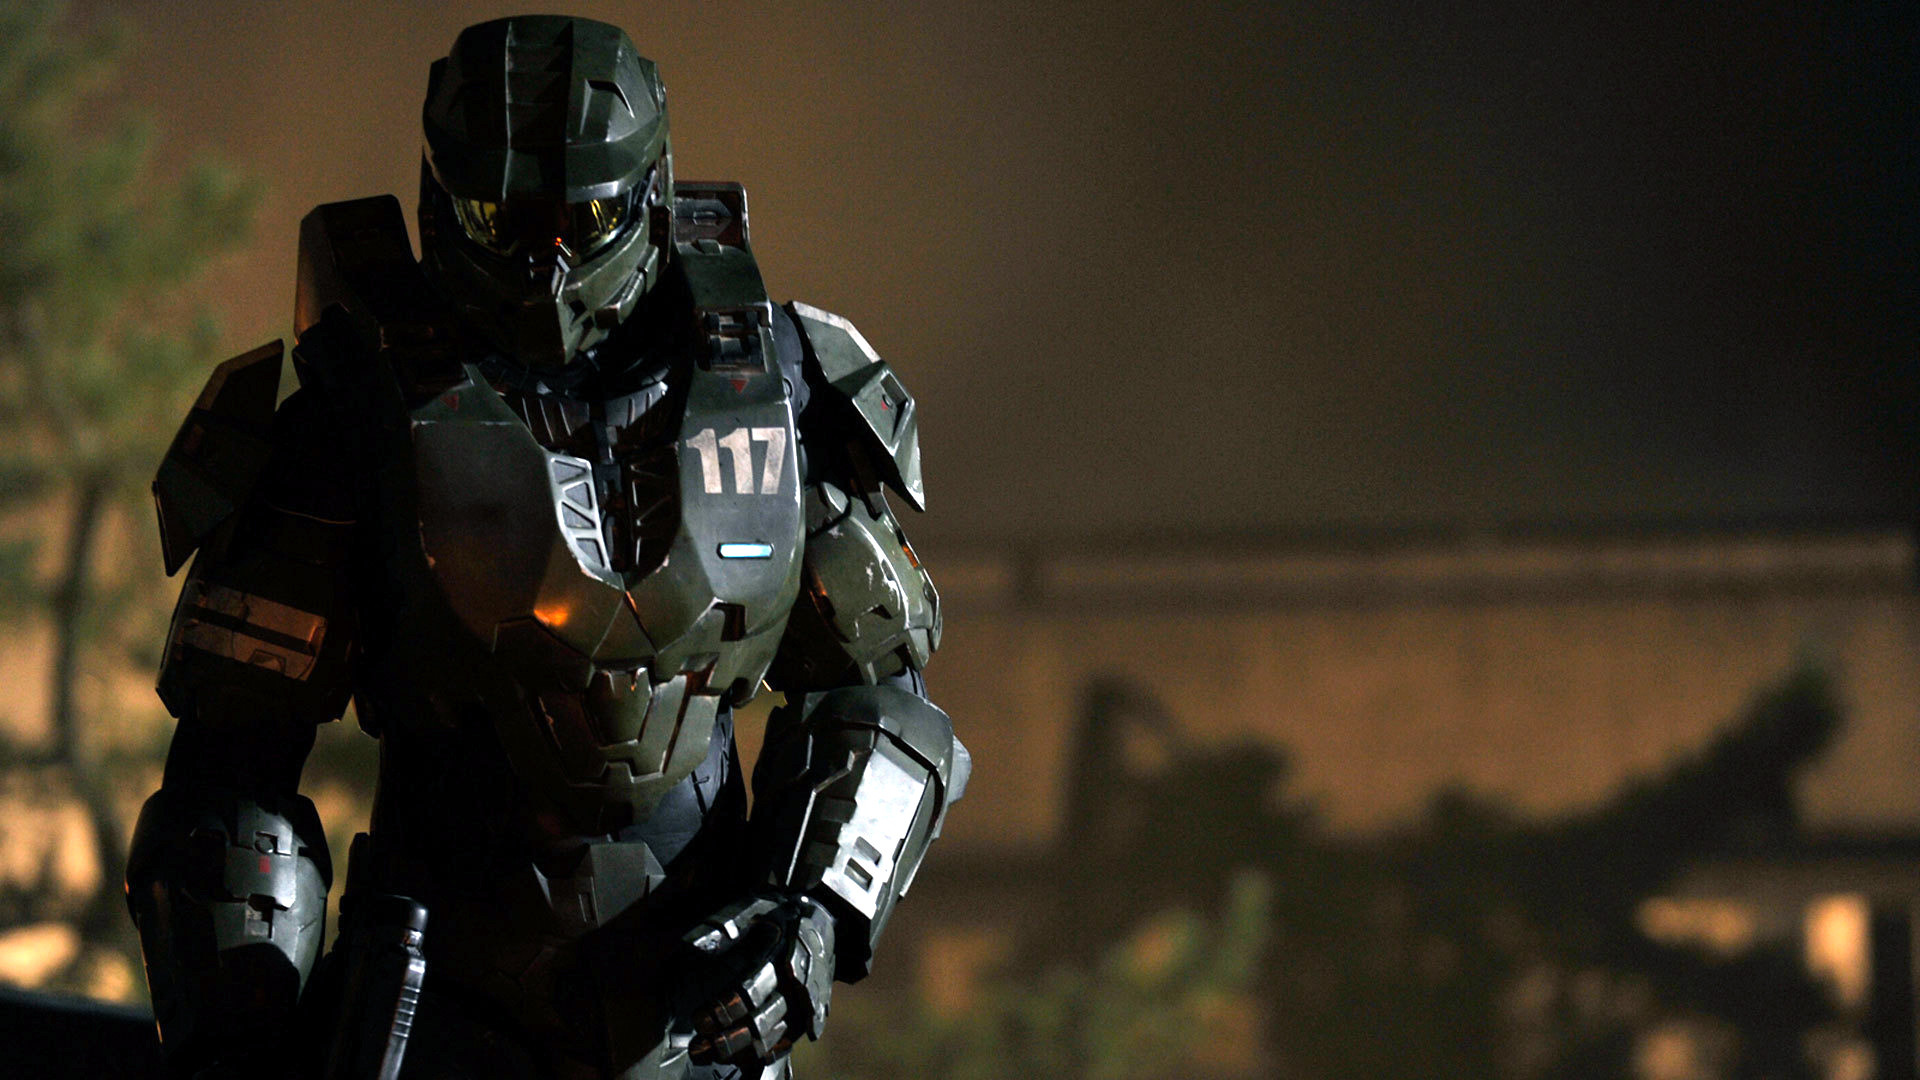 1920x1080 5 Halo 4: Forward Unto Dawn HD Wallpapers | Backgrounds - Wallpaper Abyss